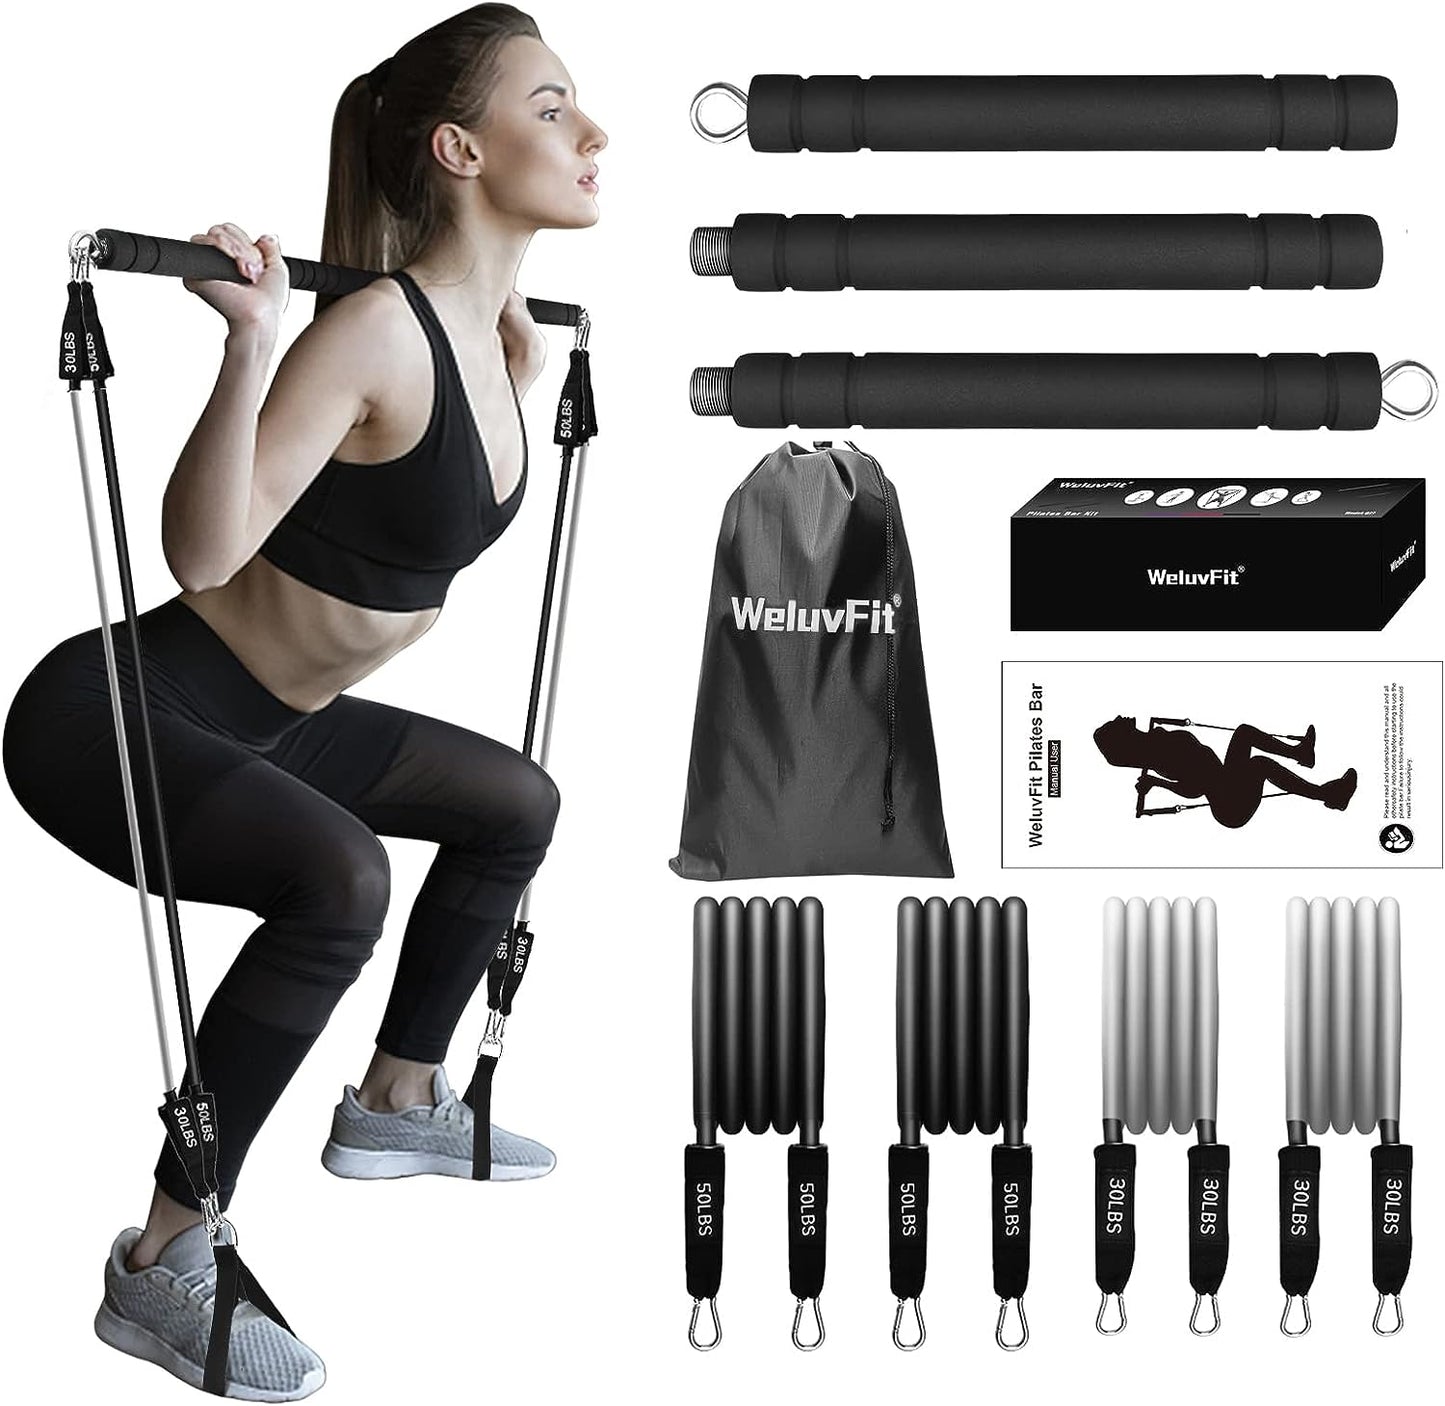 GOOD Pilates Bar Kit with Resistance Bands, WeluvFit Exercise Fitness Equipment for Women & Men, Home Gym Workouts Stainless Steel Stick Squat Yoga Pilates Flexbands Kit for Full Body Shaping